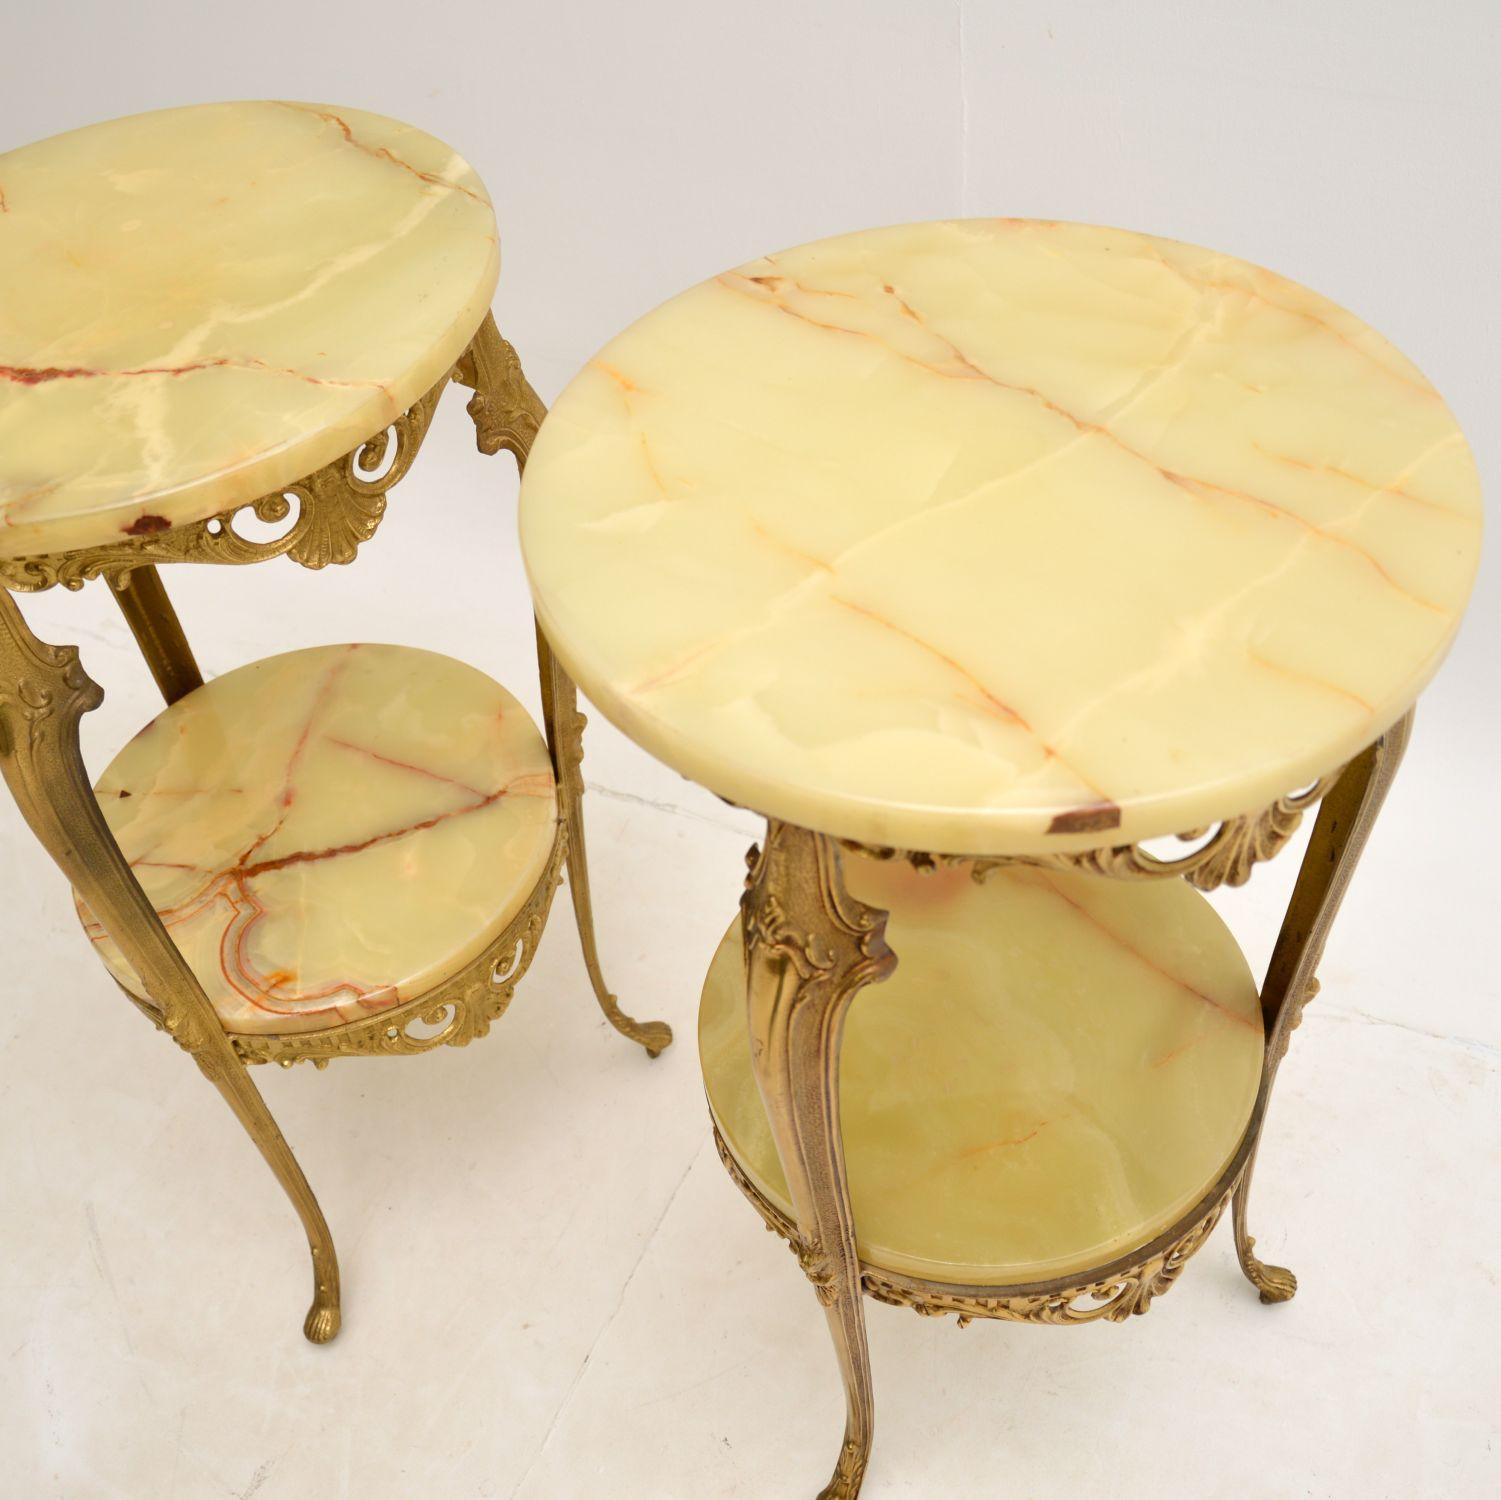 20th Century Pair of Antique French Brass & Onyx Side Tables